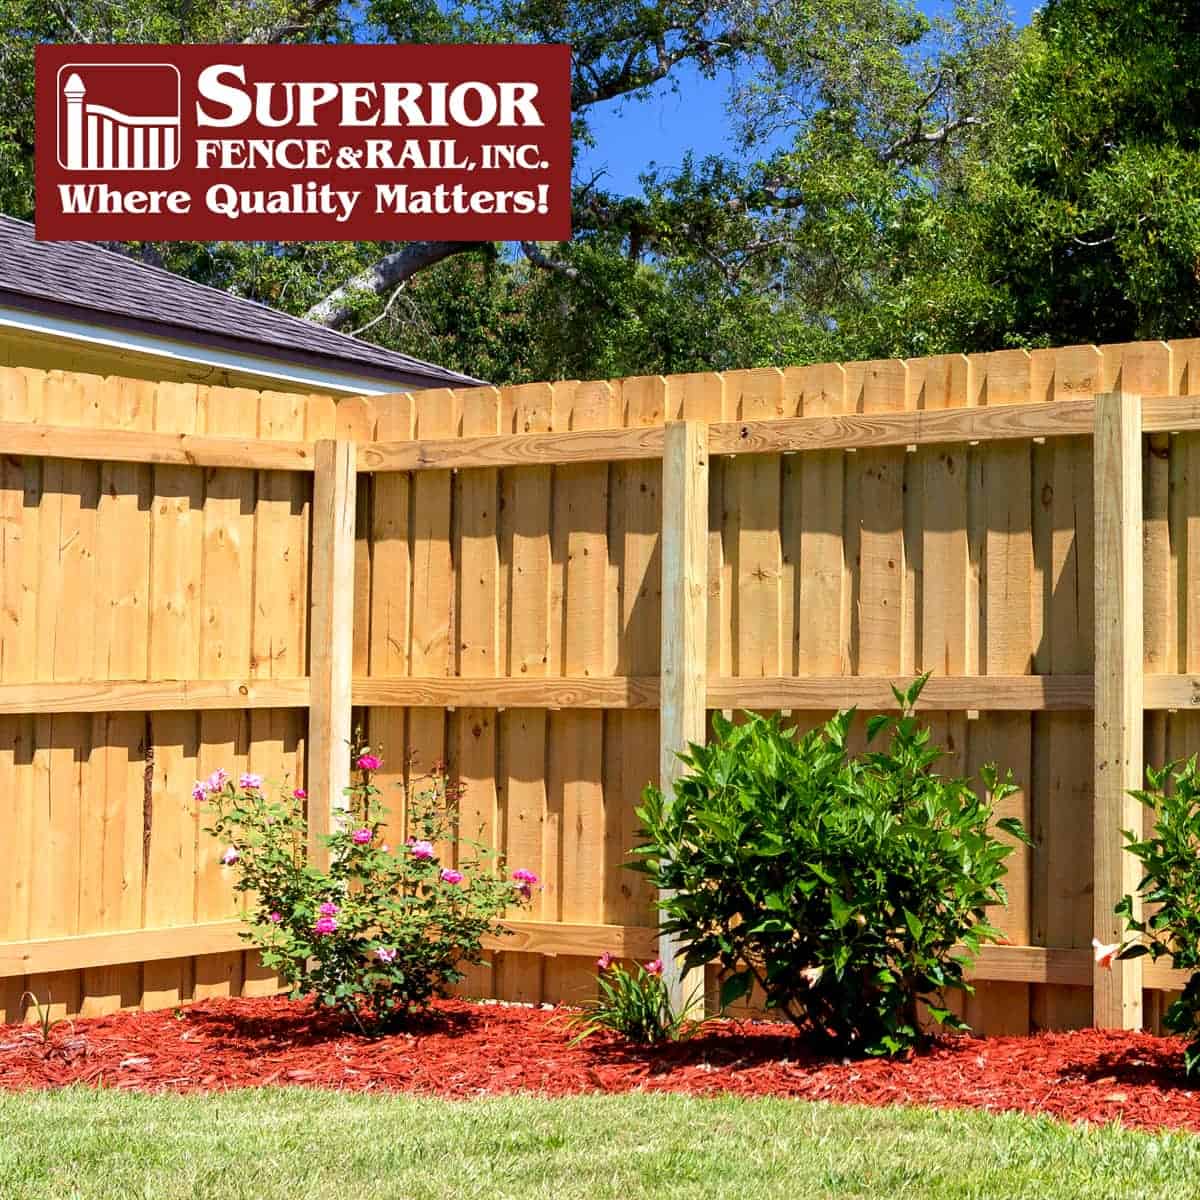 Prospect fence company contractor